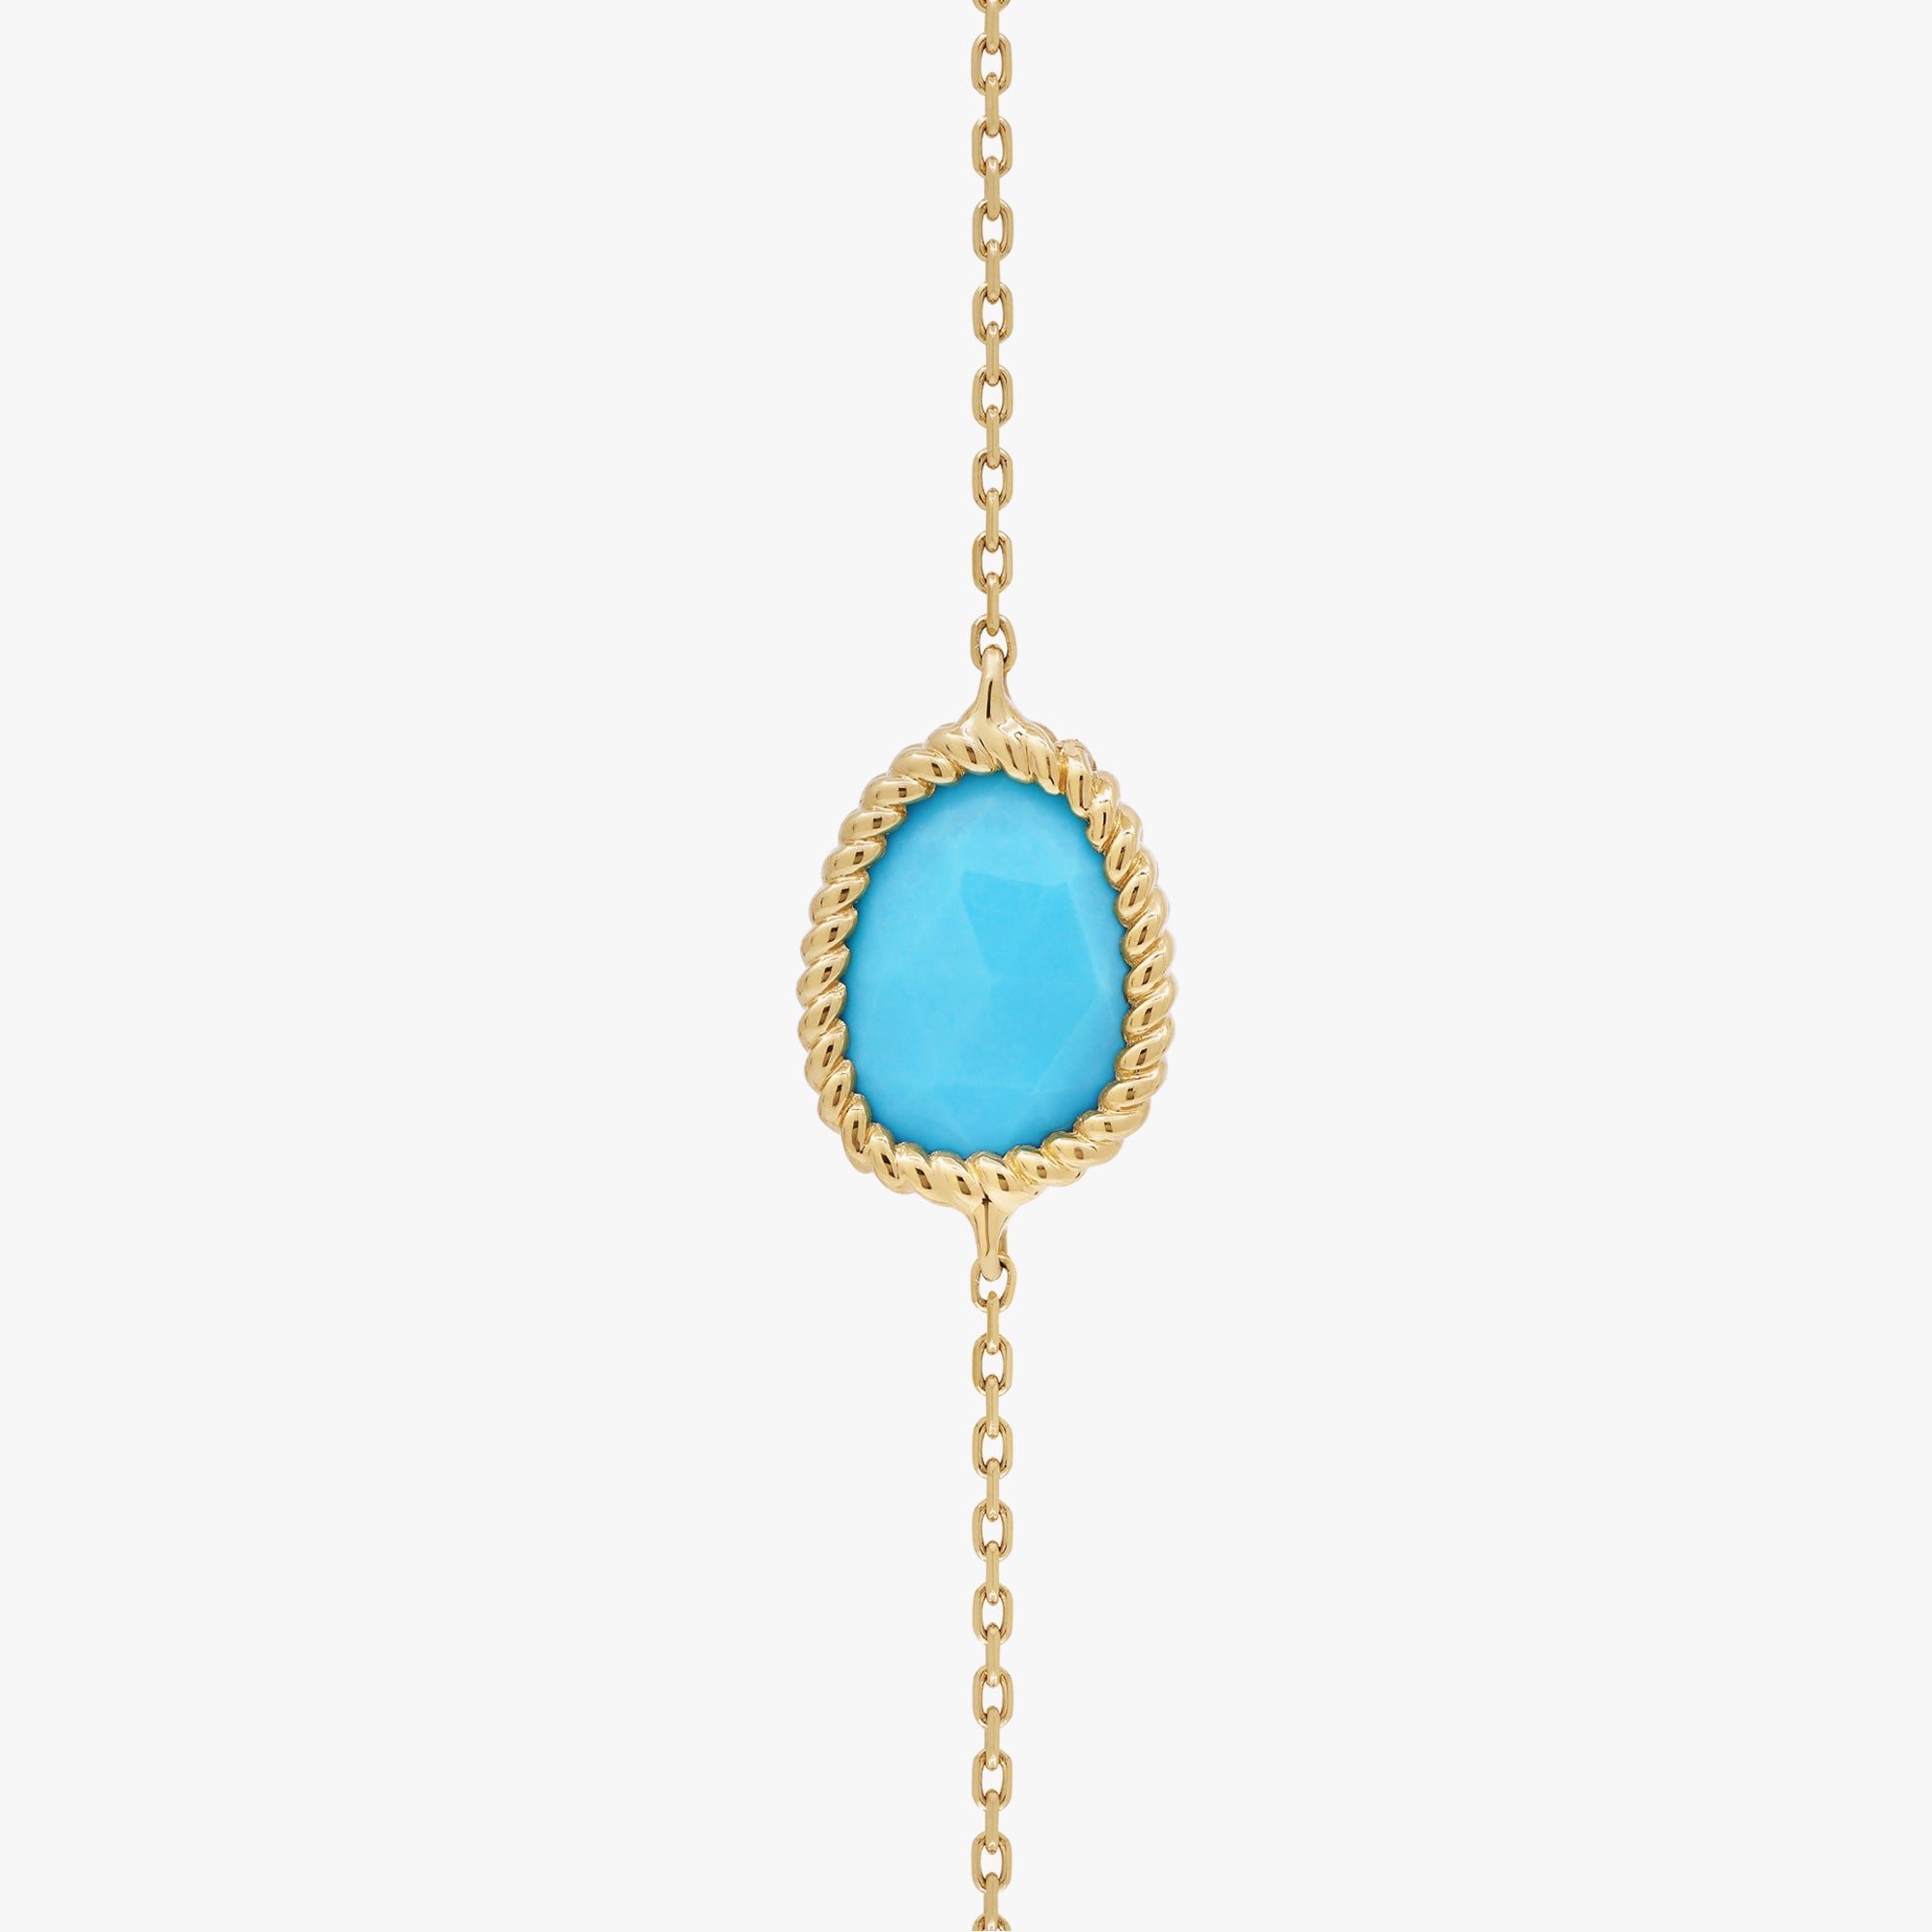 Nina Mariner Long Necklace In 18 Karat Yellow Gold With Natural White Diamonds And Turquoise Stones